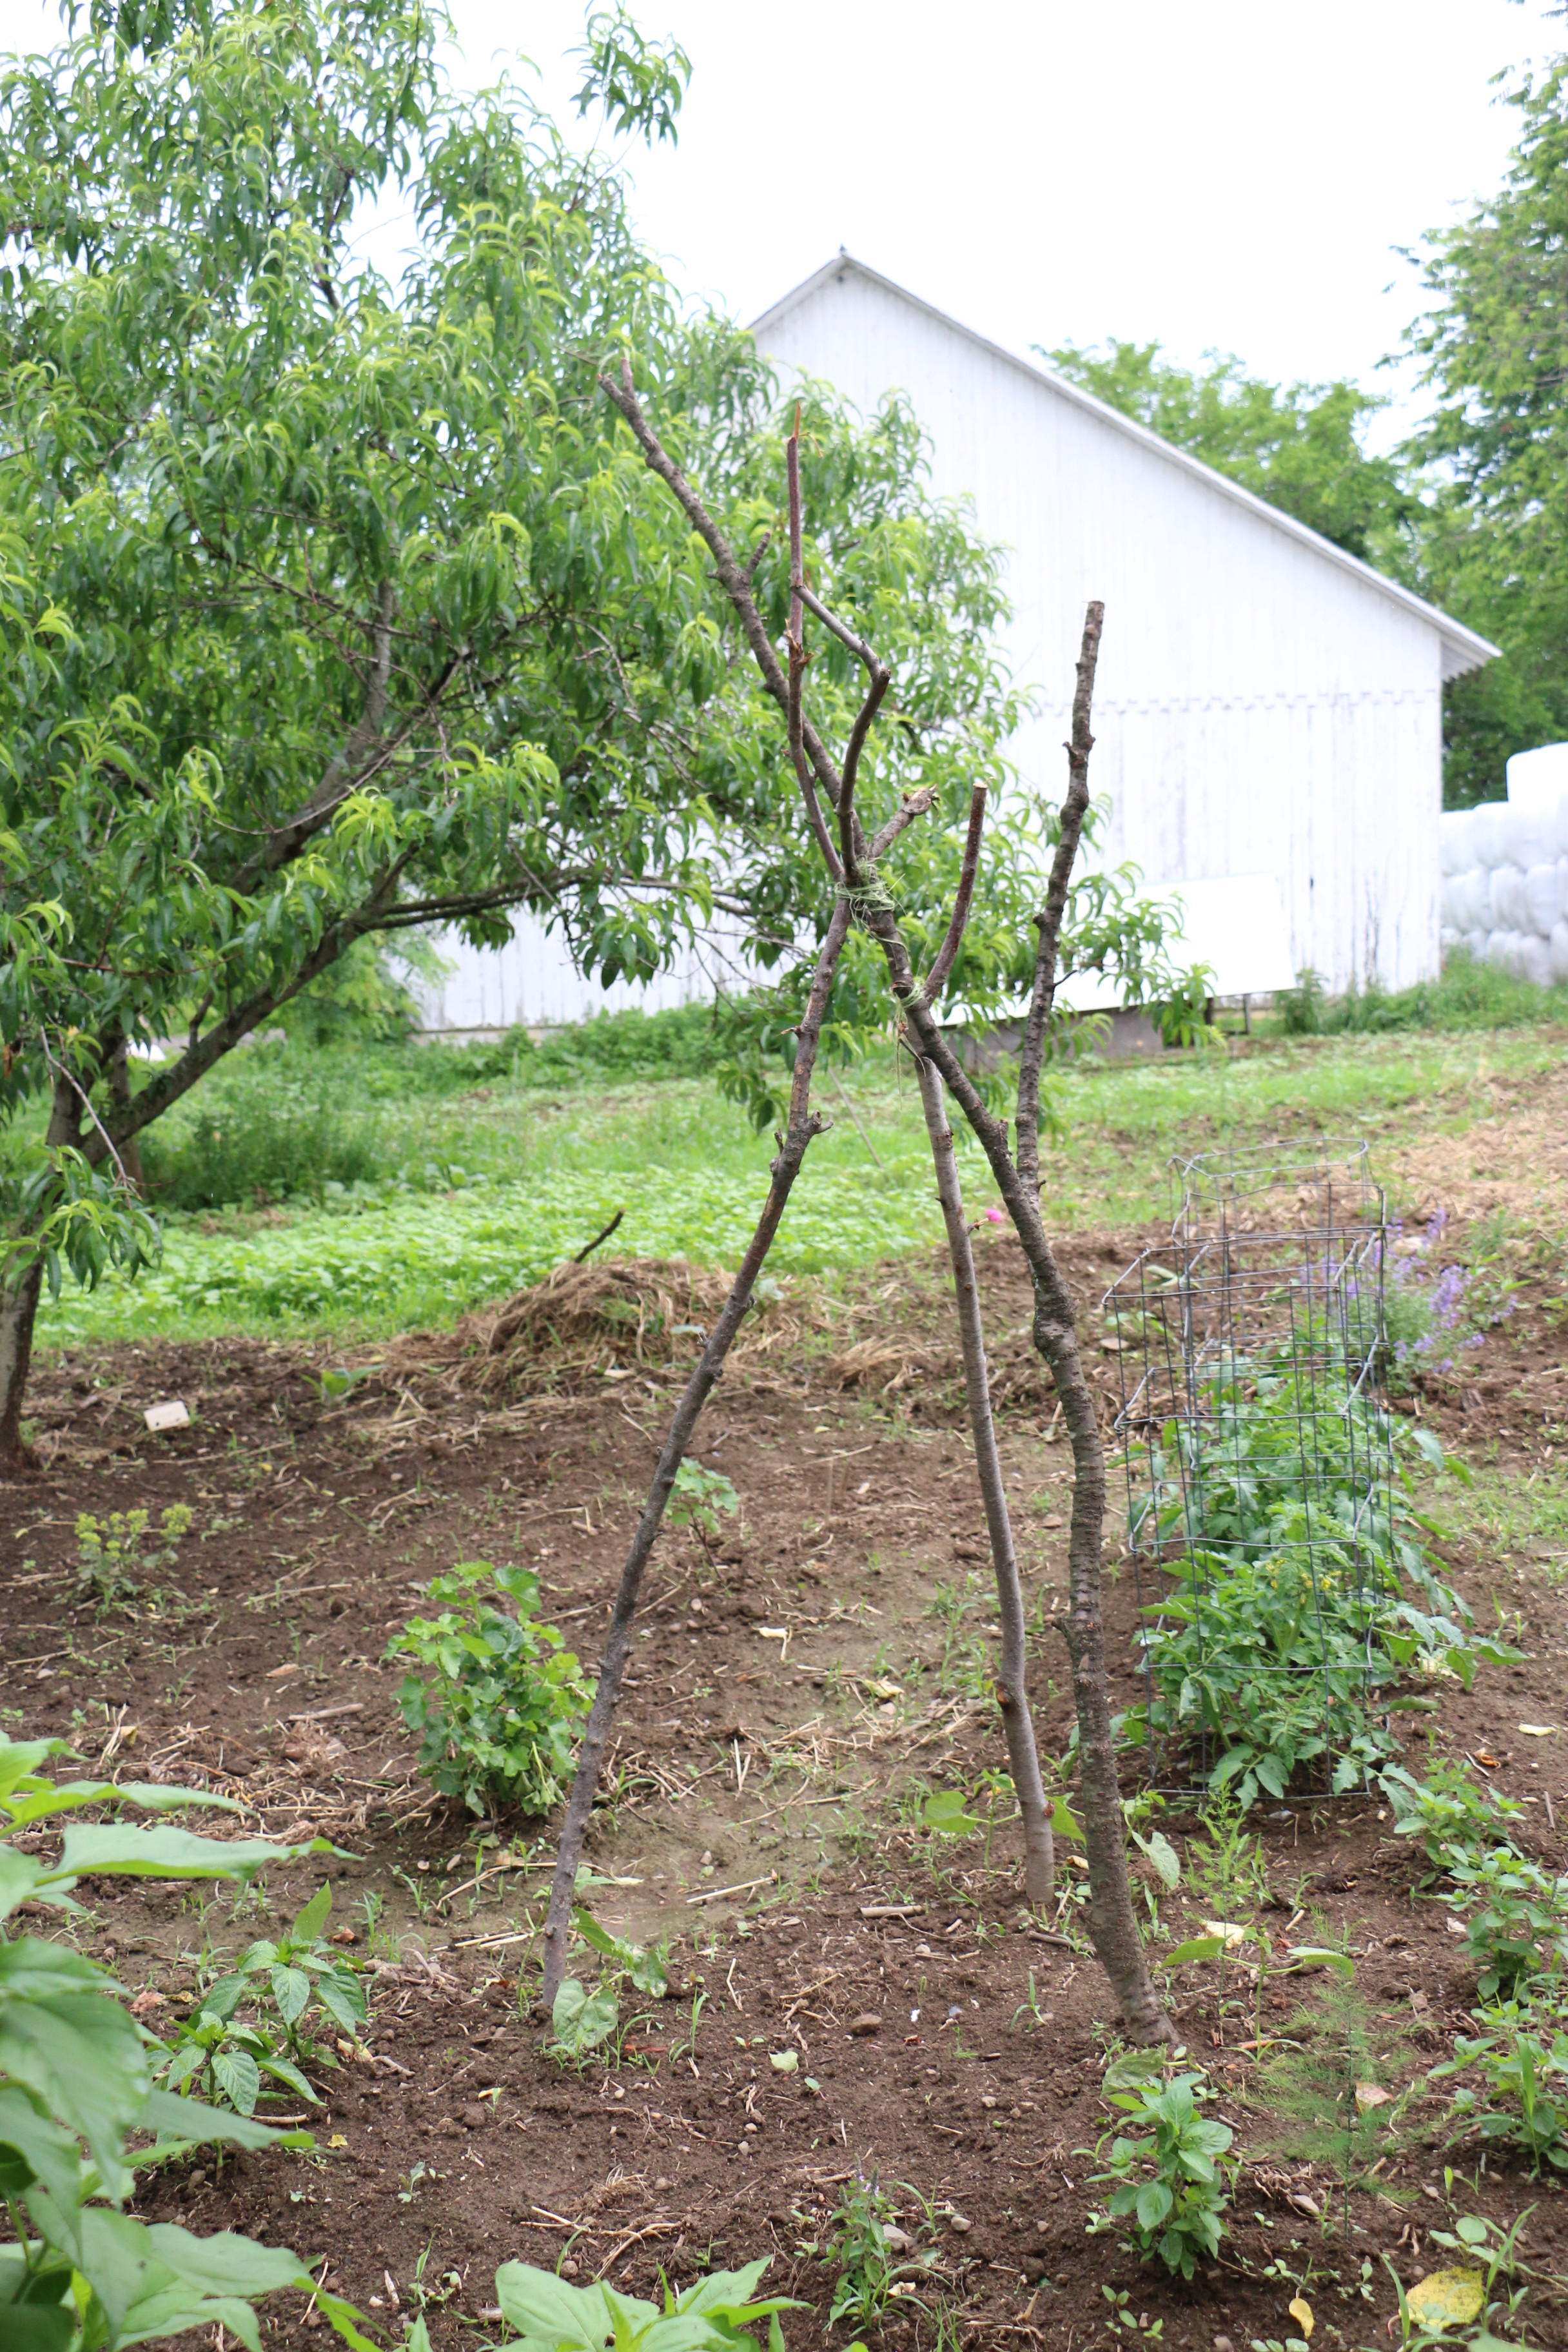 A second view of the big dripline garden, with a pole teepee for clmbing plants.